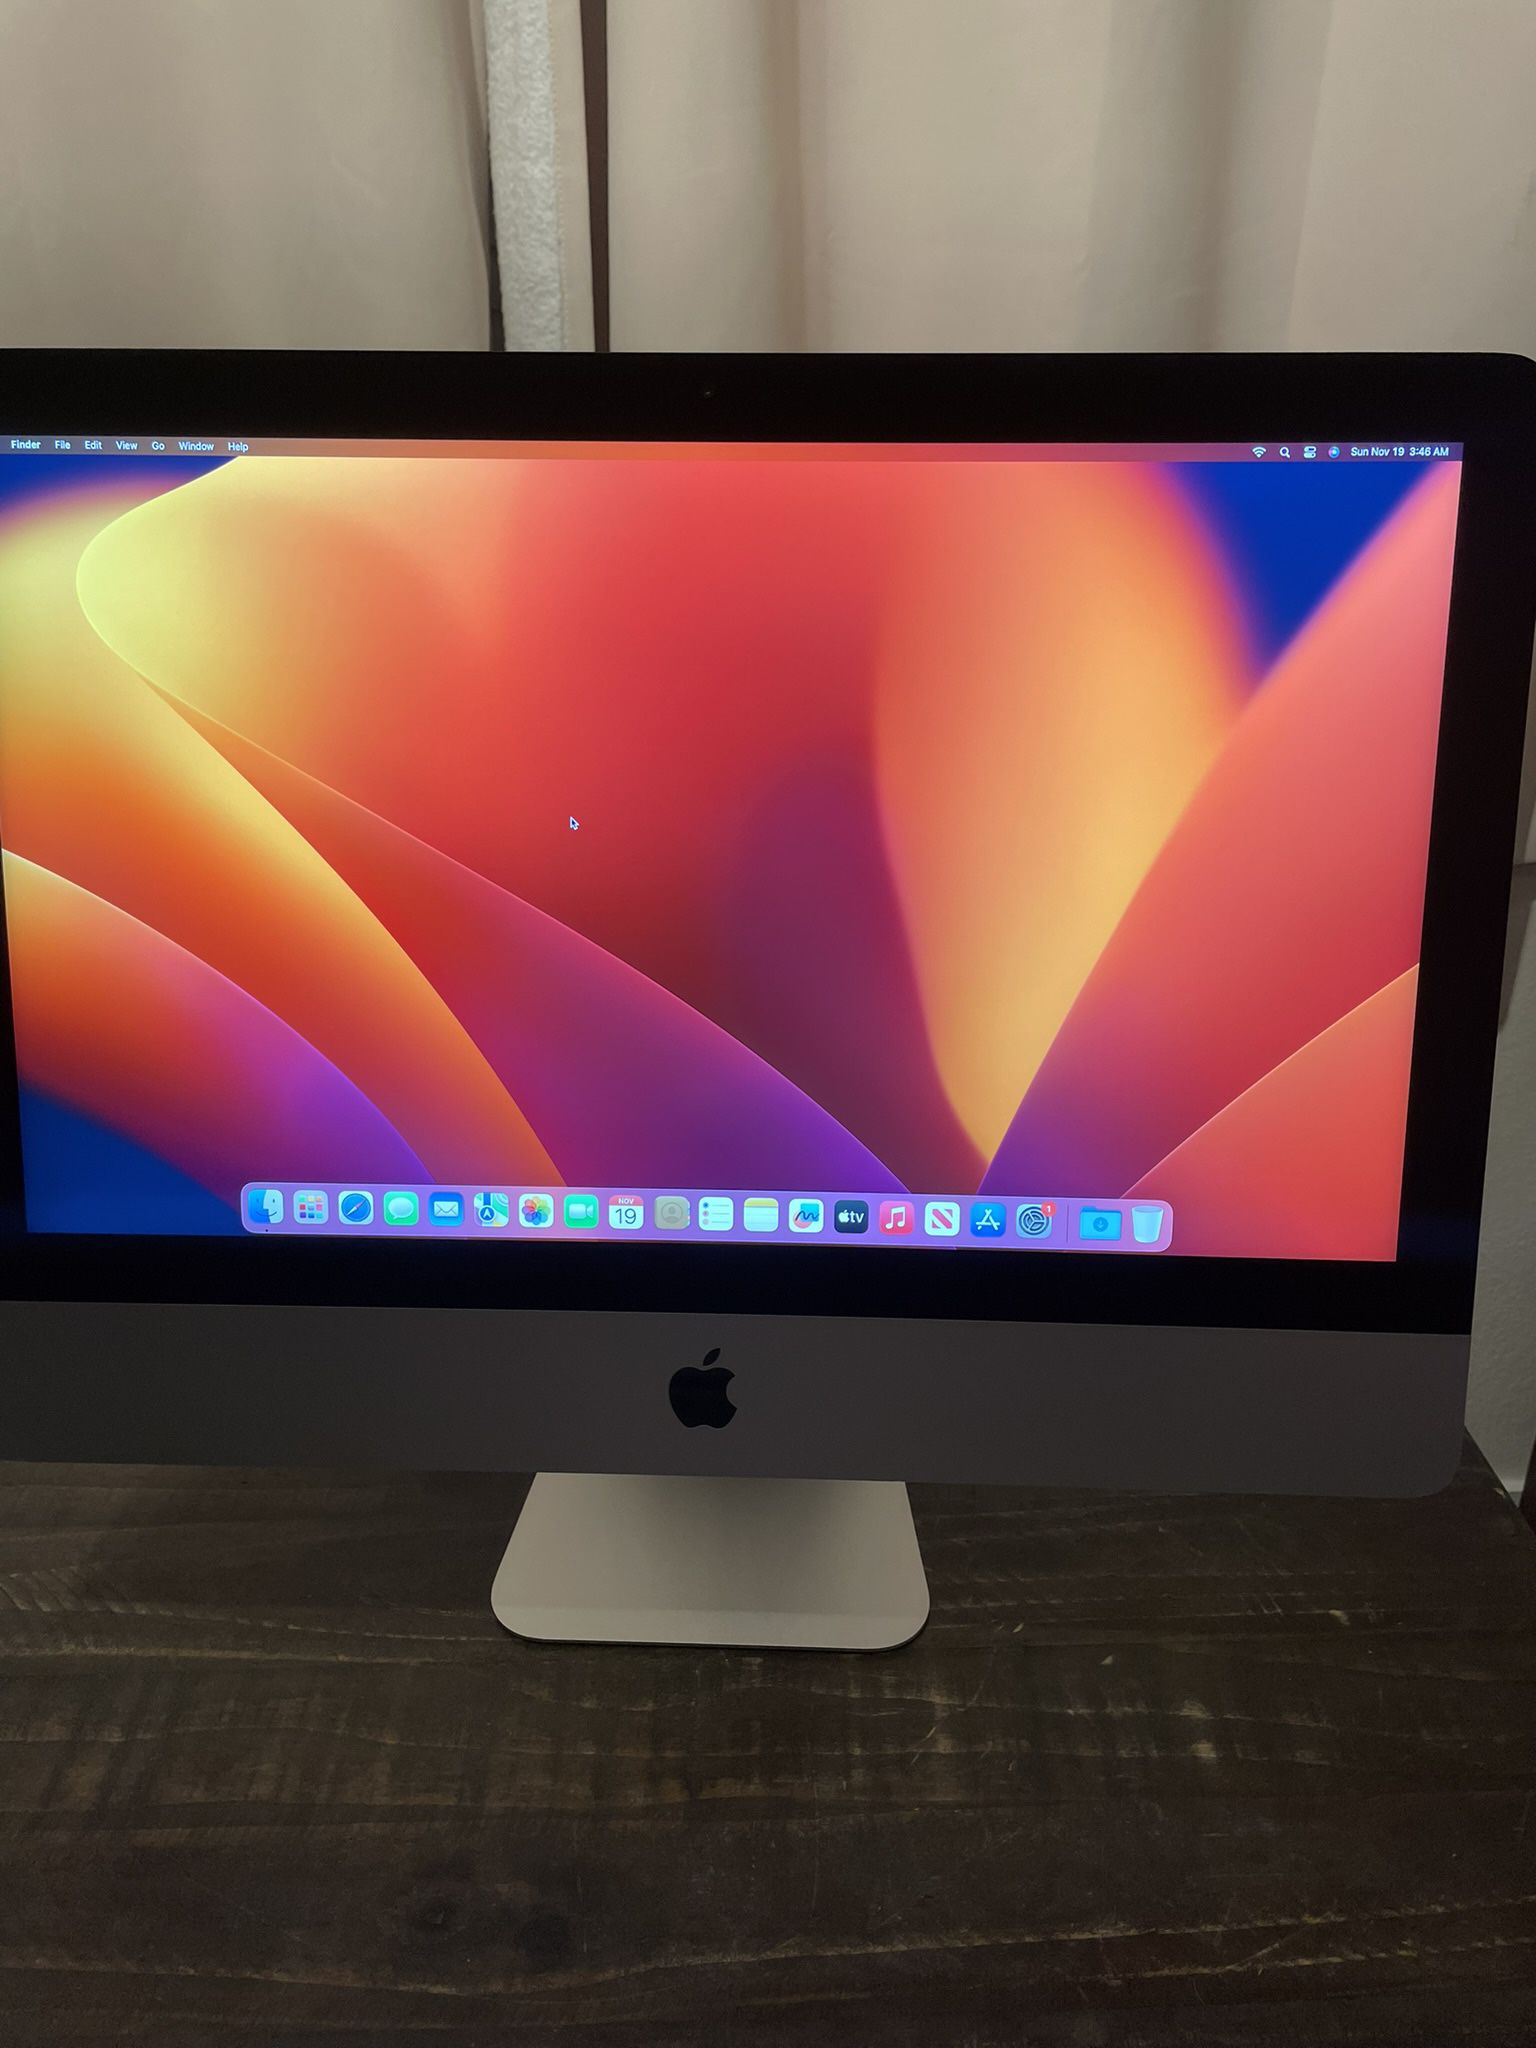 2017 Apple iMac 21.5-inch 4K Retina display 256gb Ssd 16gb Ram. Works Great. iMac With Power Cord Only. No Keyboard. No Mouse